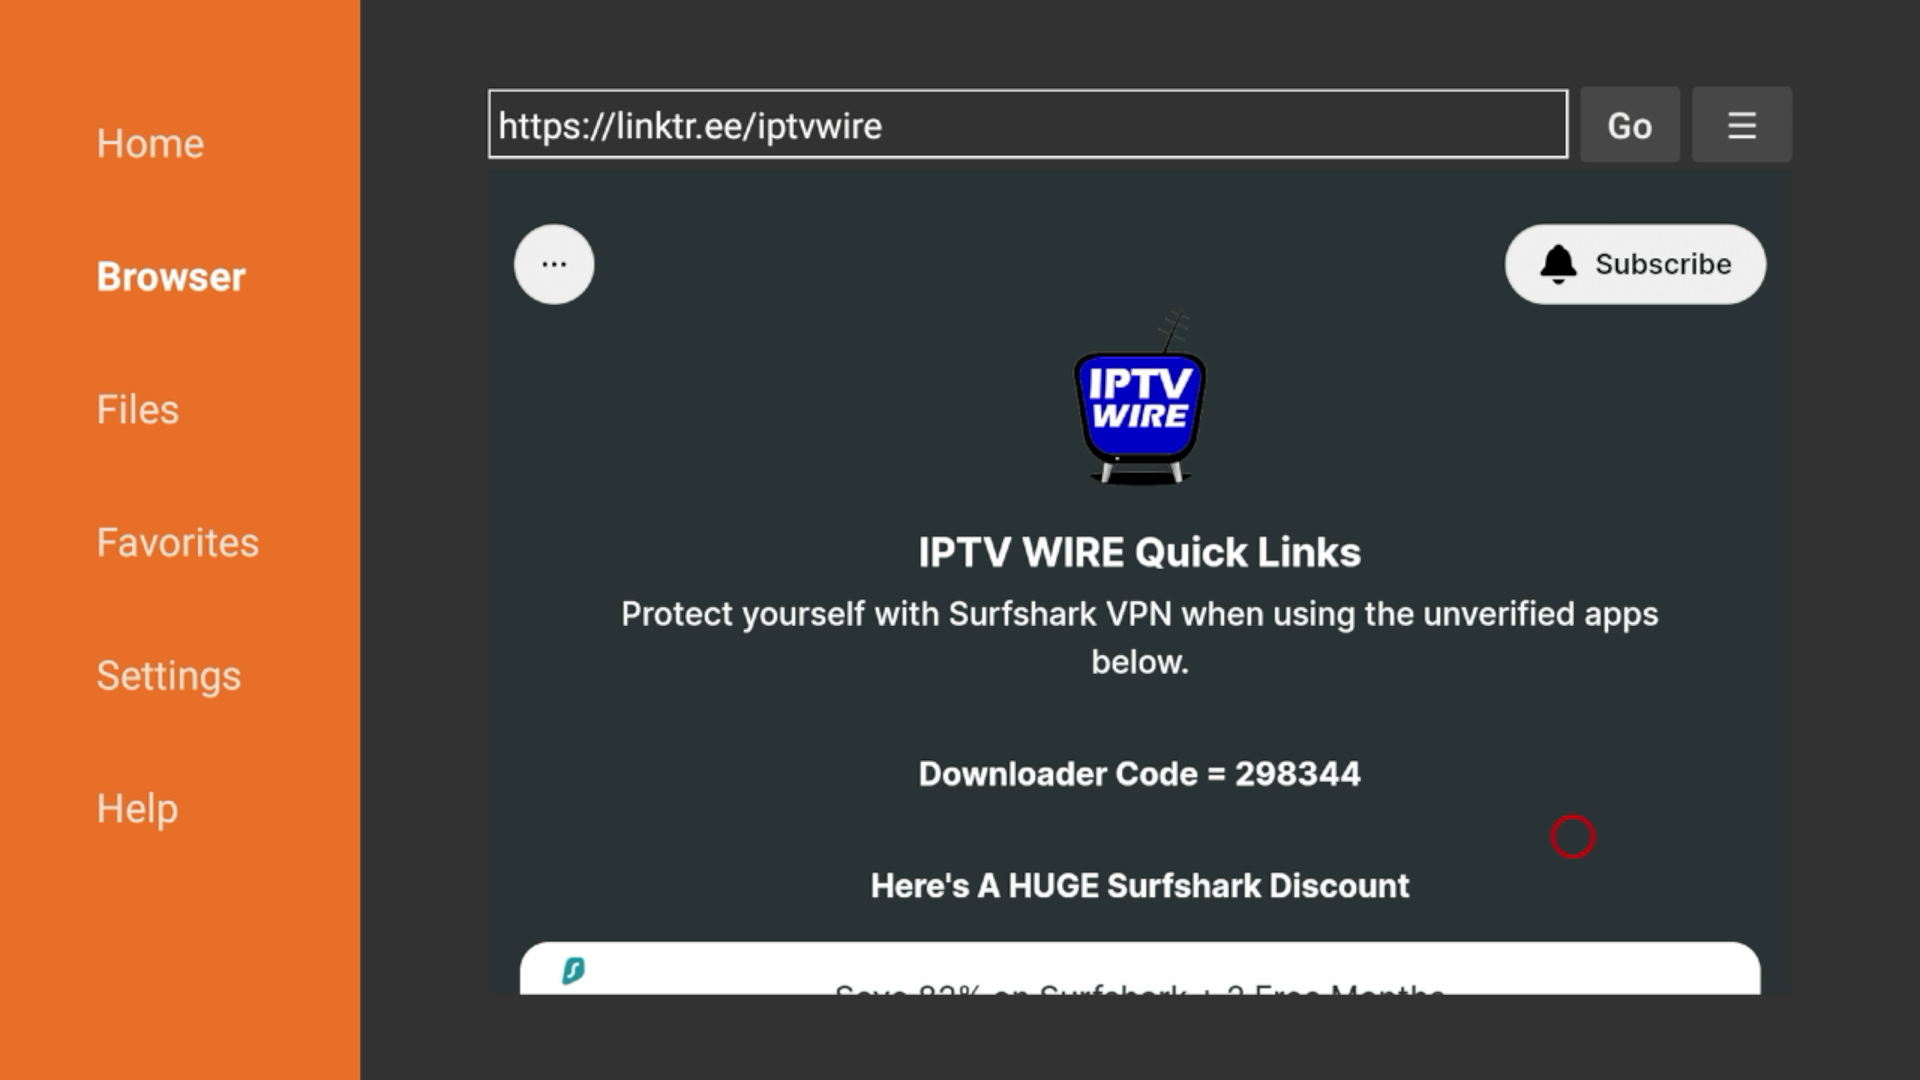 Wait a few seconds until you are redirected to the IPTV Wire Quick Links page.